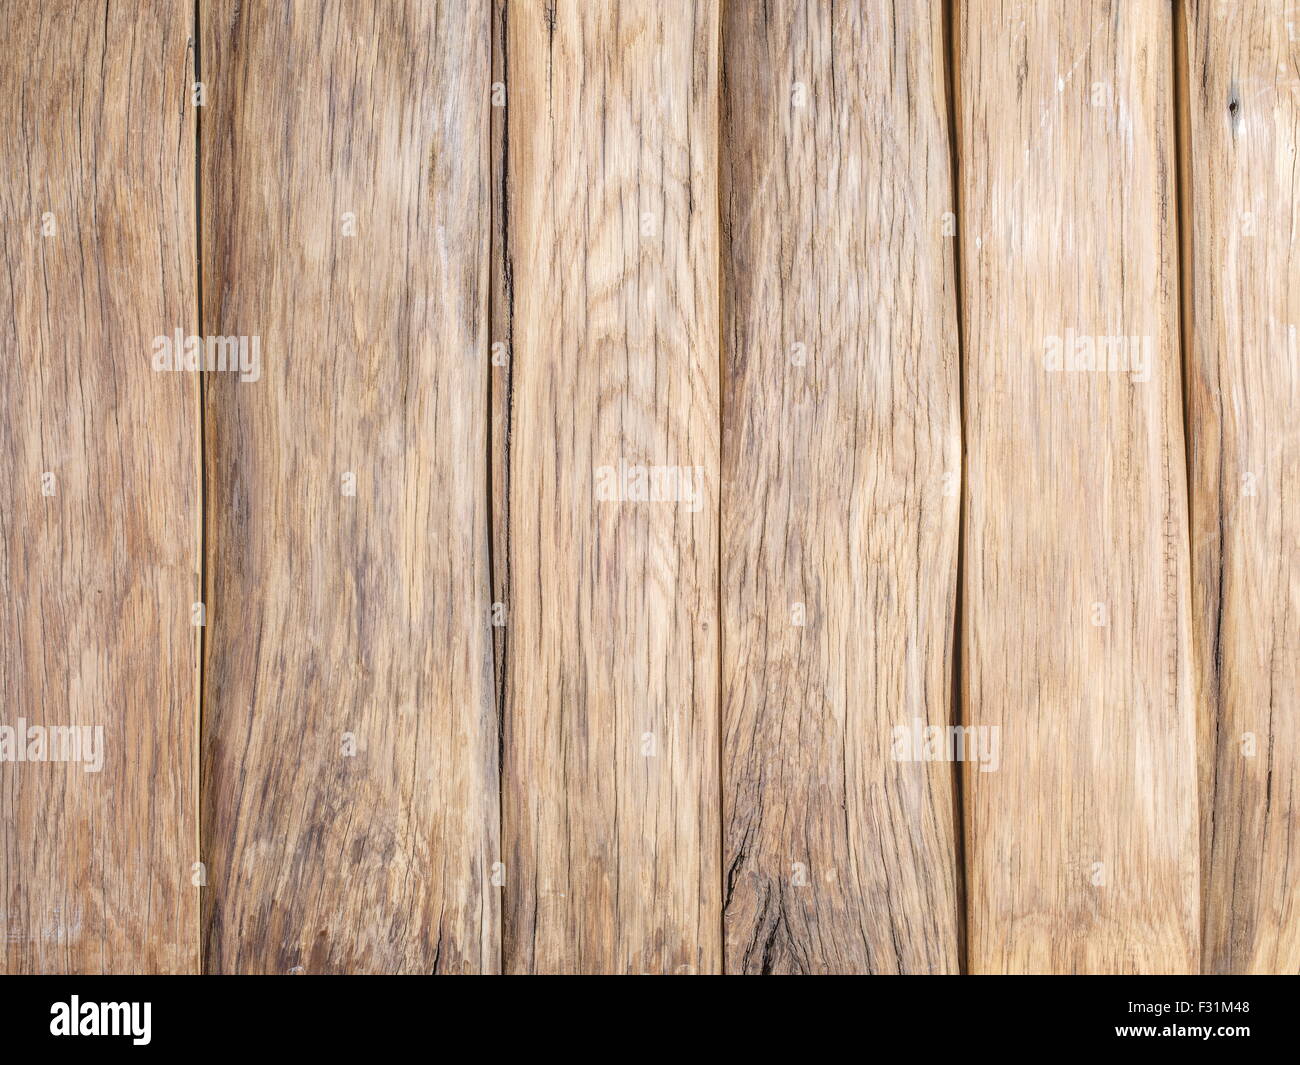 Brown wooden background. Stock Photo